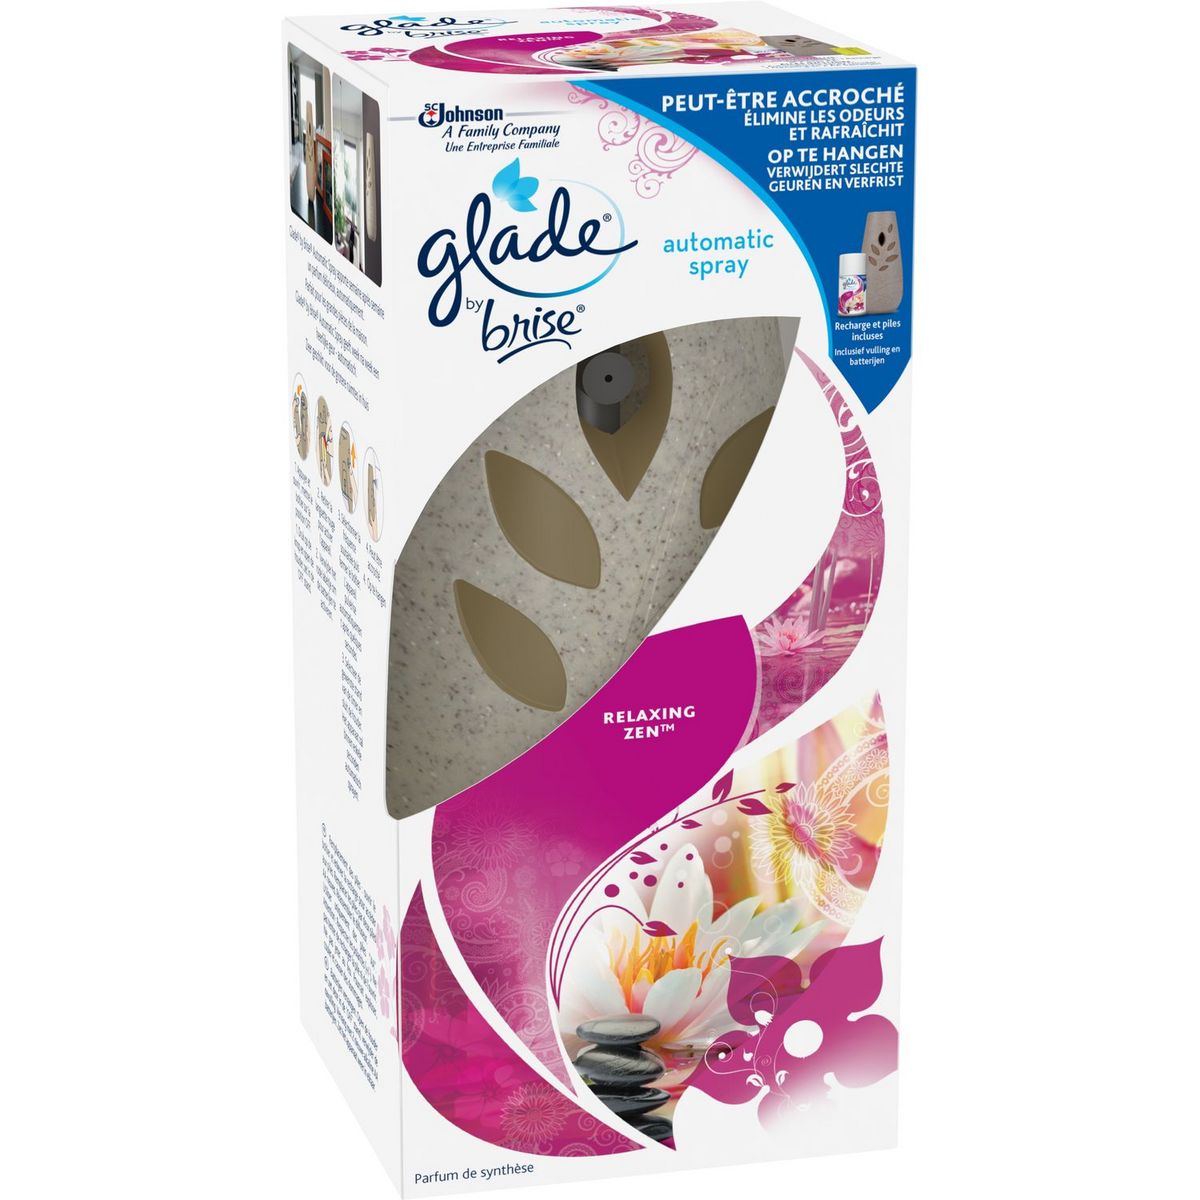 GLADE Glade diffuseur automatique spray relaxing zen + recharge